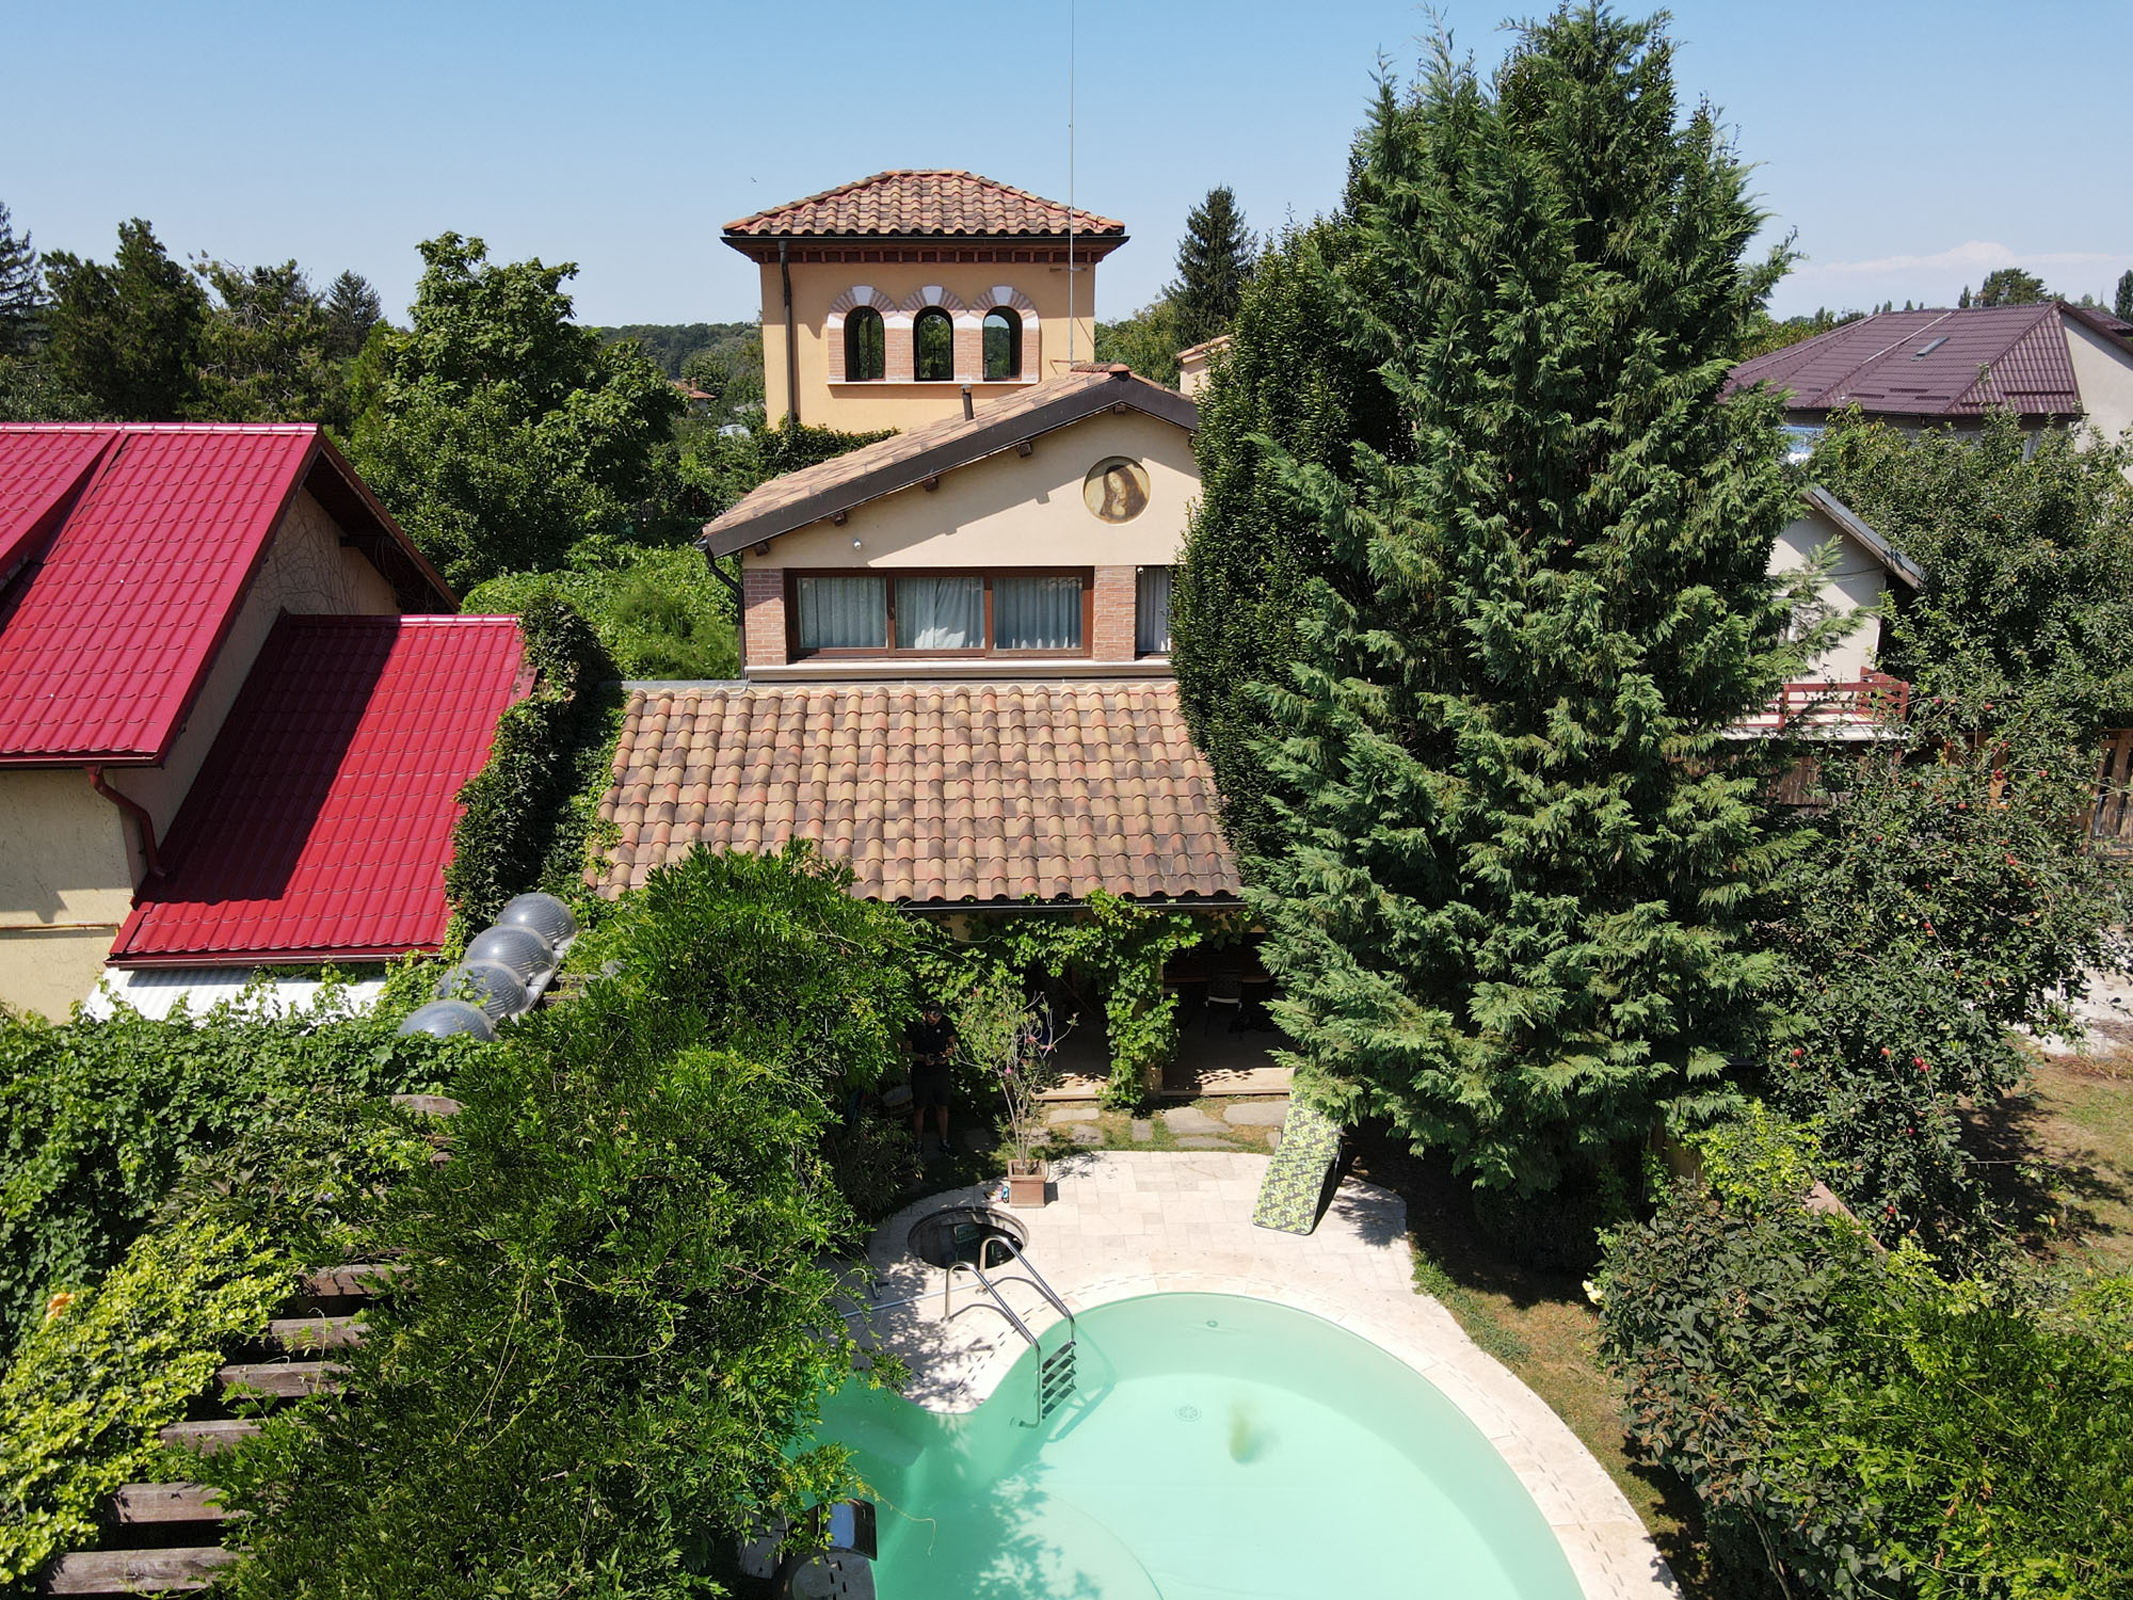 The Toscan Villa with Pool, Cellar and Pavilion